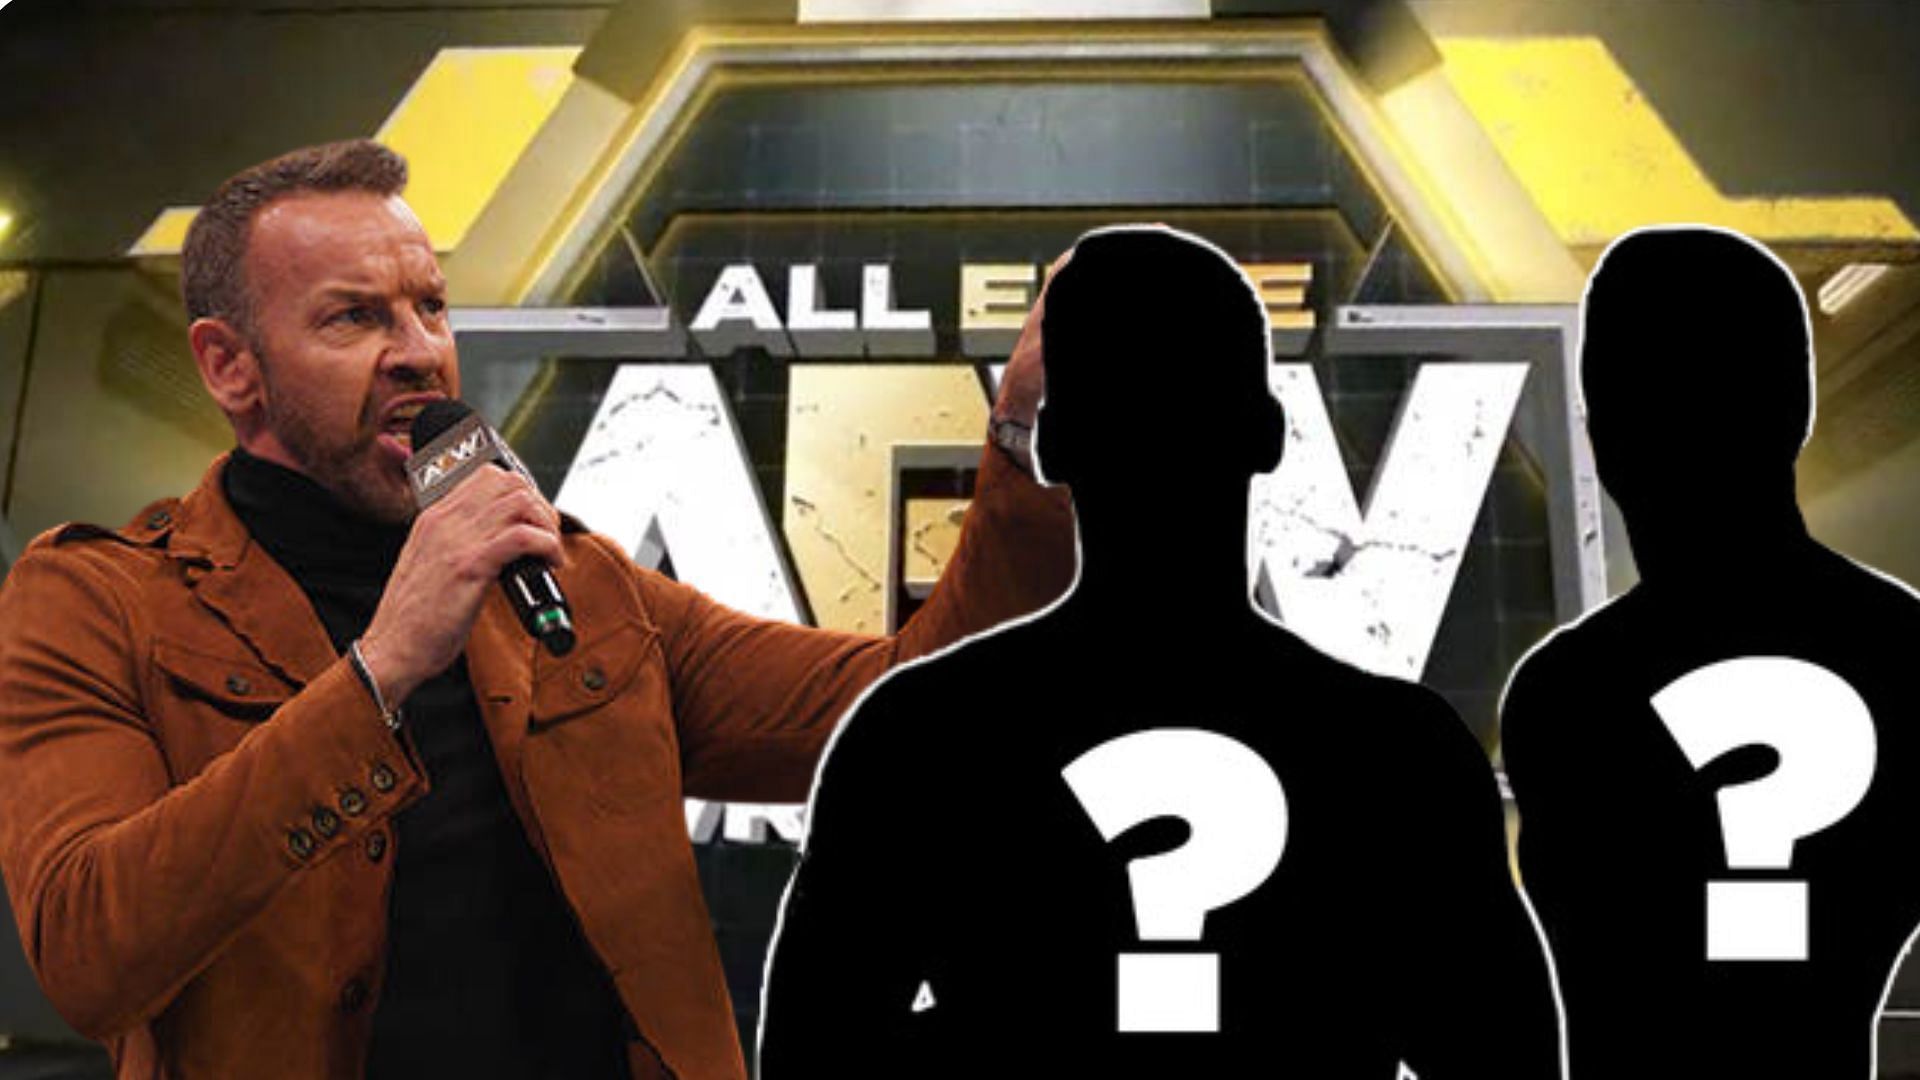 Christian Cage has proven to be a dastardly villain in AEW